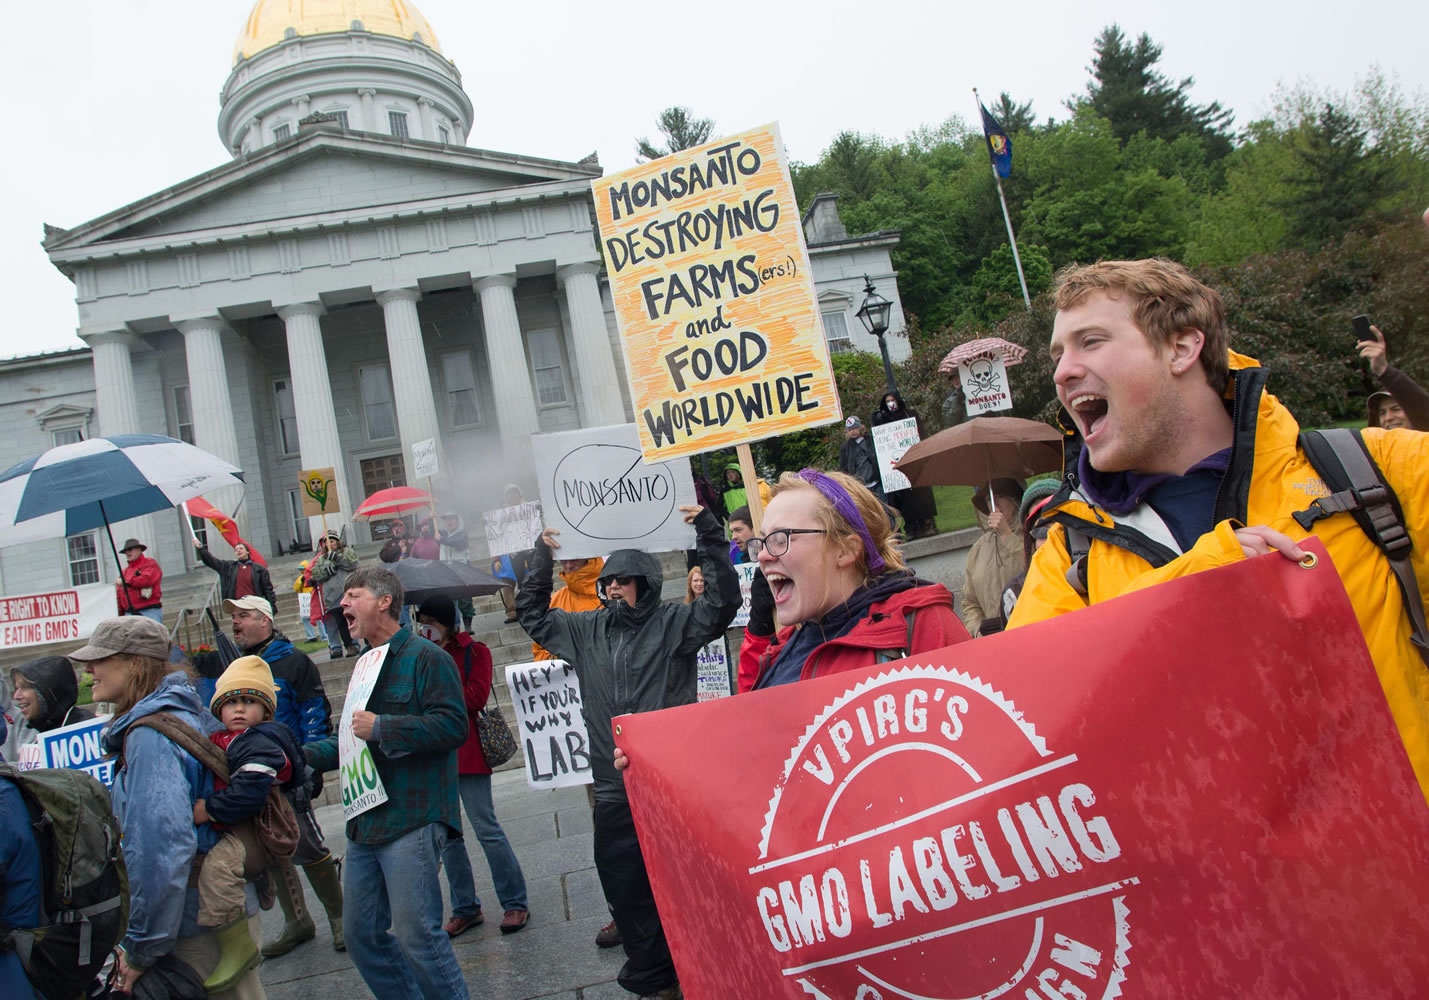 People chant and carry signs during a protest against Monsanto in front of the capitol building in Montpelier, Vt. on Saturday. Marches and rallies against seed giant Monsanto were held across the U.S. and in dozens of other countries Saturday. Protesters say they want to call attention to the dangers posed by genetically modified food and the food giants that produce it. Monsanto Co., based in St.